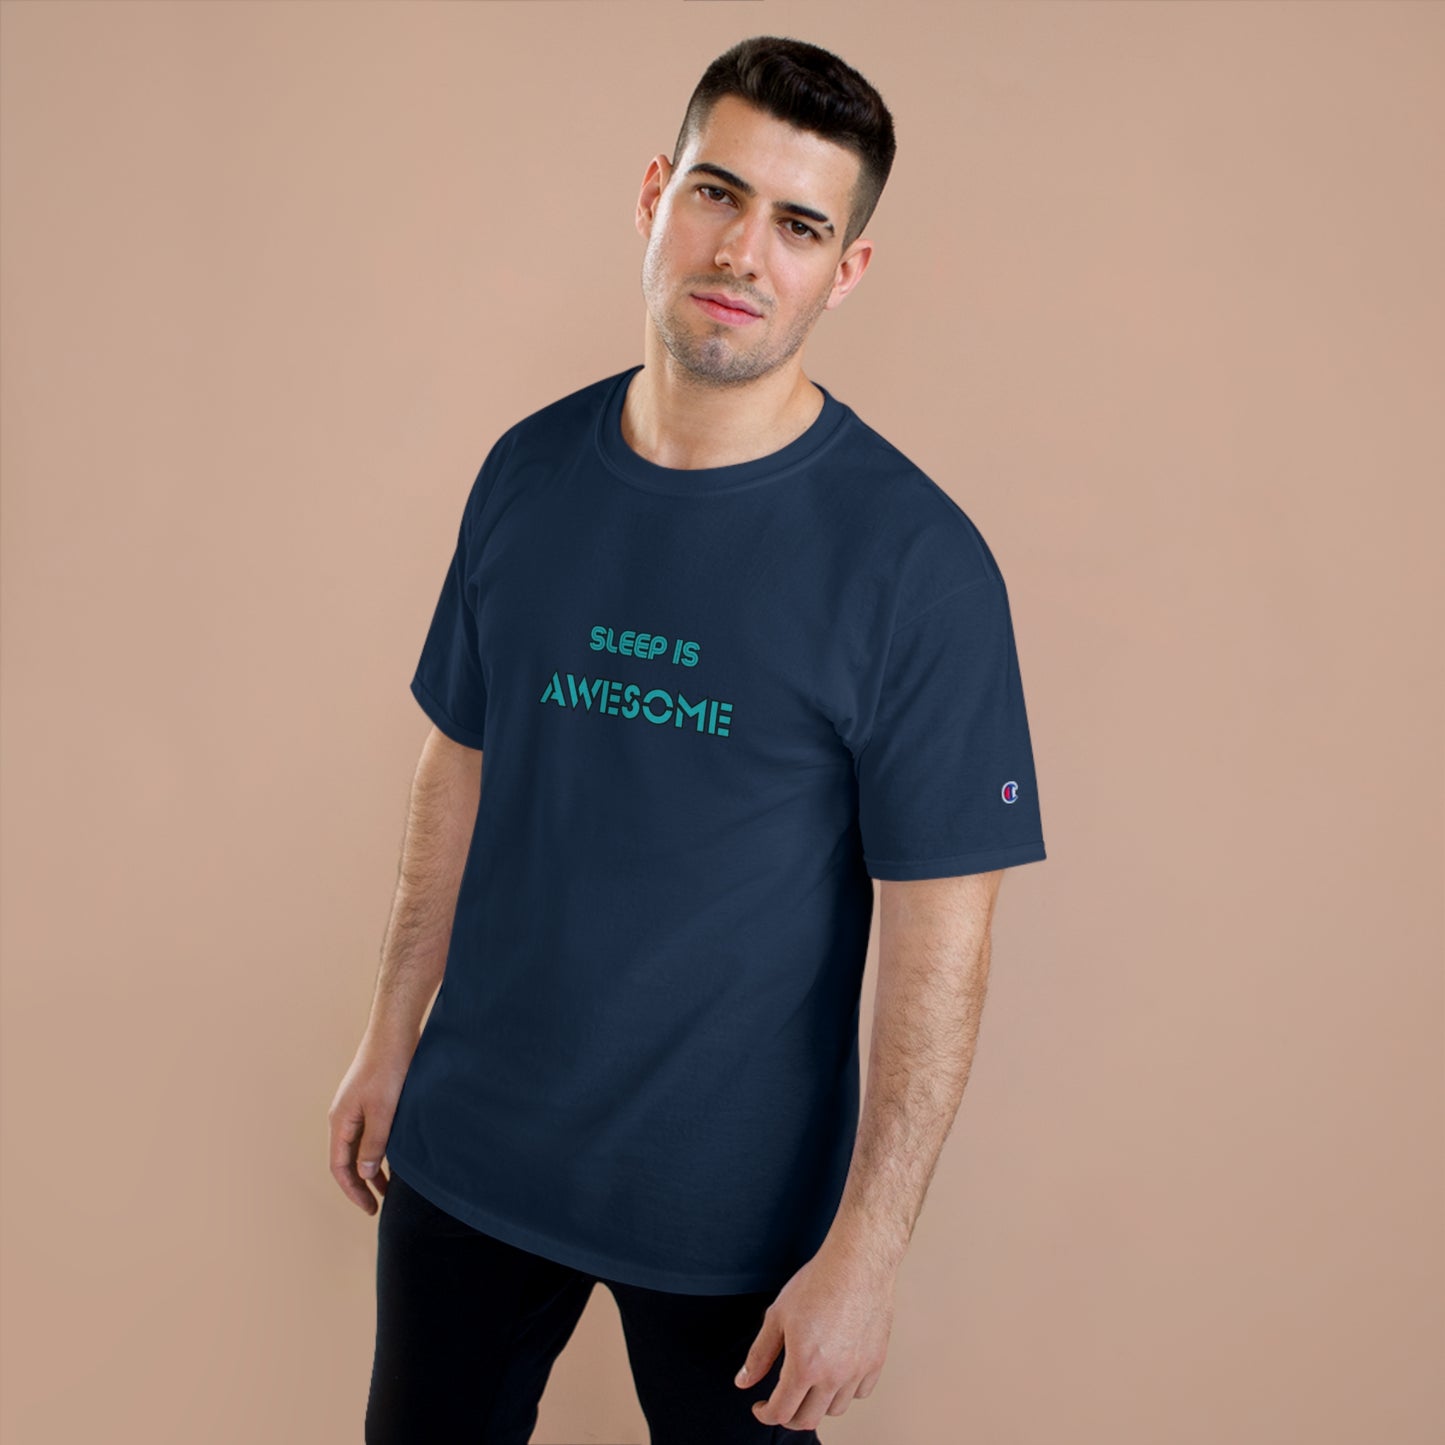 "Sleep is Awesome" Champion Men's T-Shirt